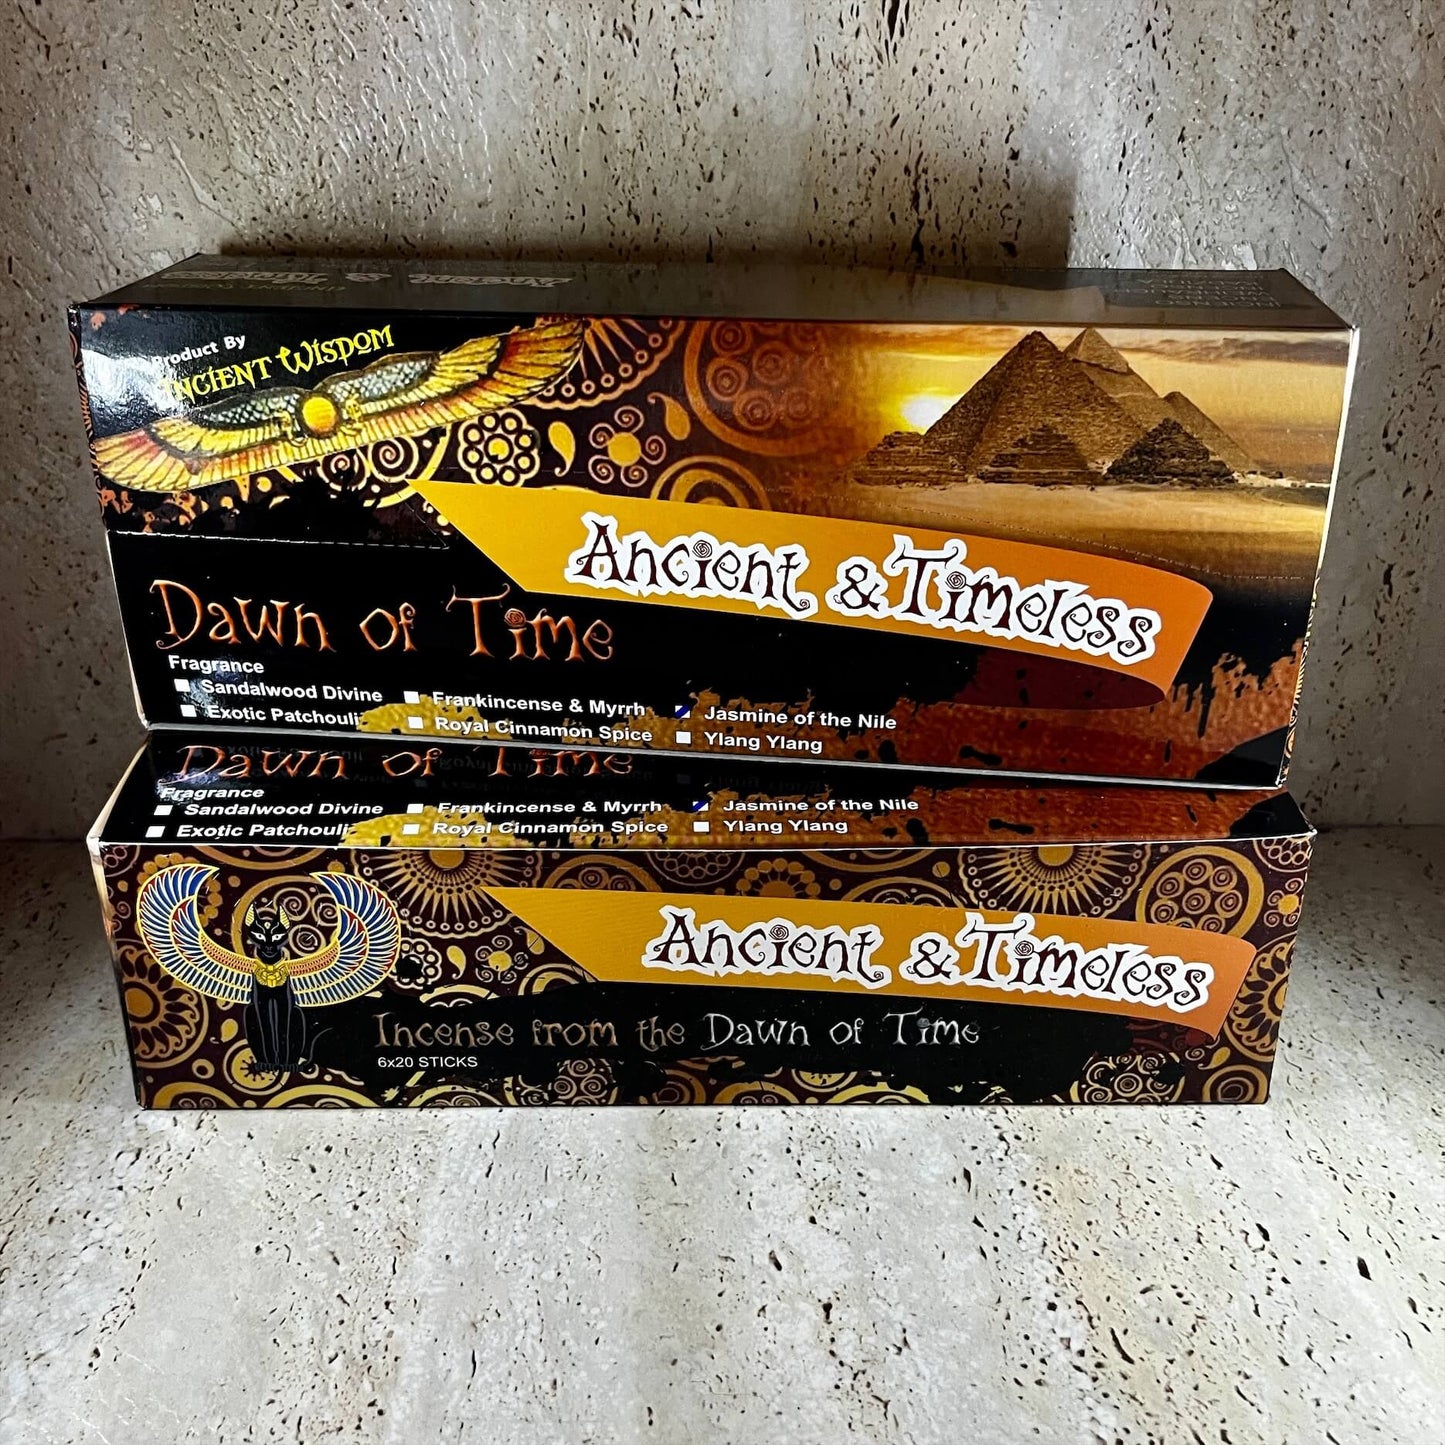 Dawn of Time Royal Cinnamon and Spice incense